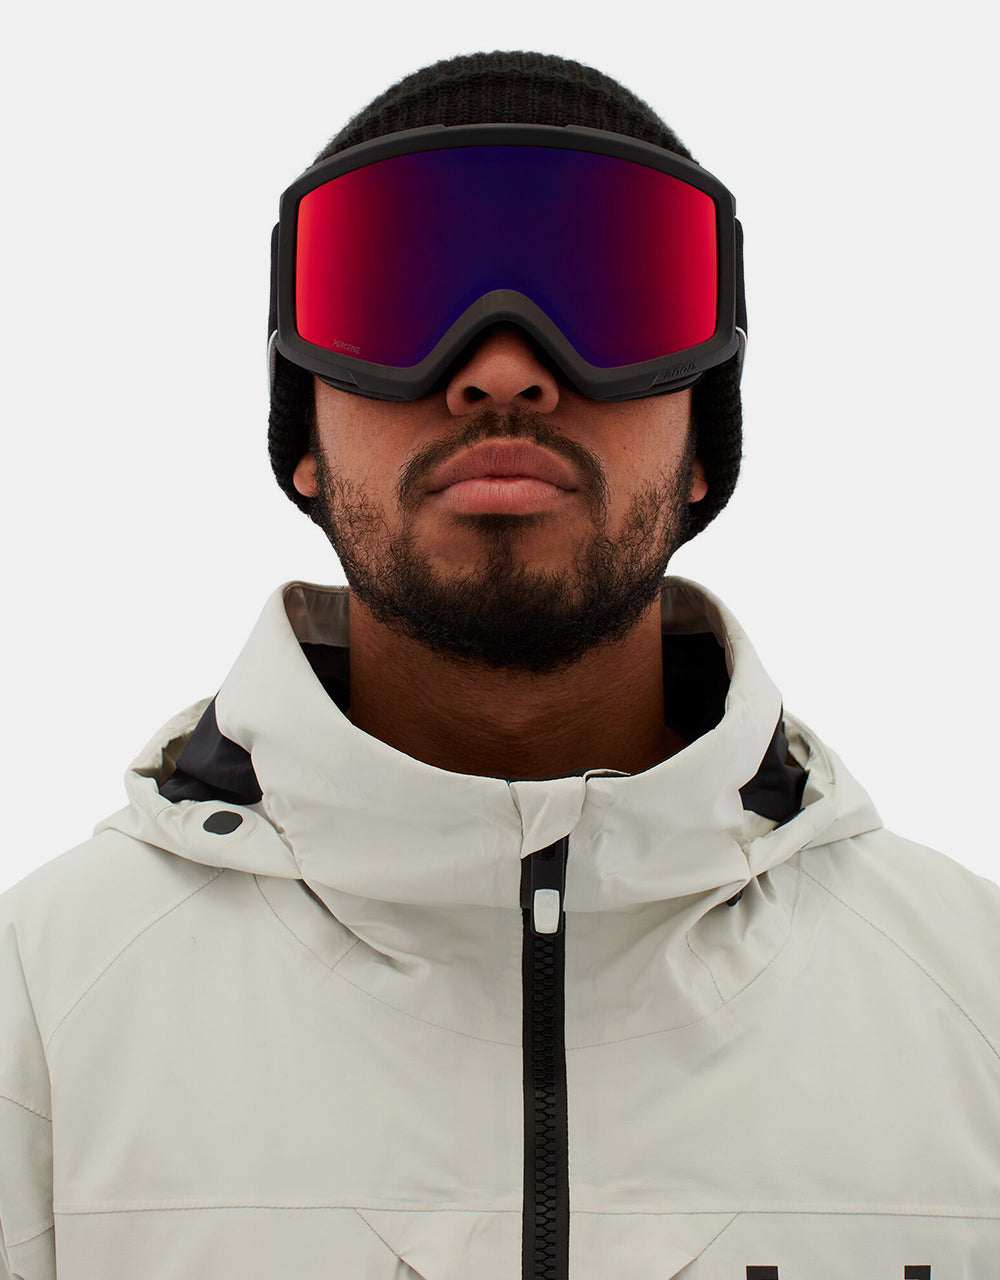 Anon Helix 2.0 Snowboard Goggles - Black/Perceive Sunny Red